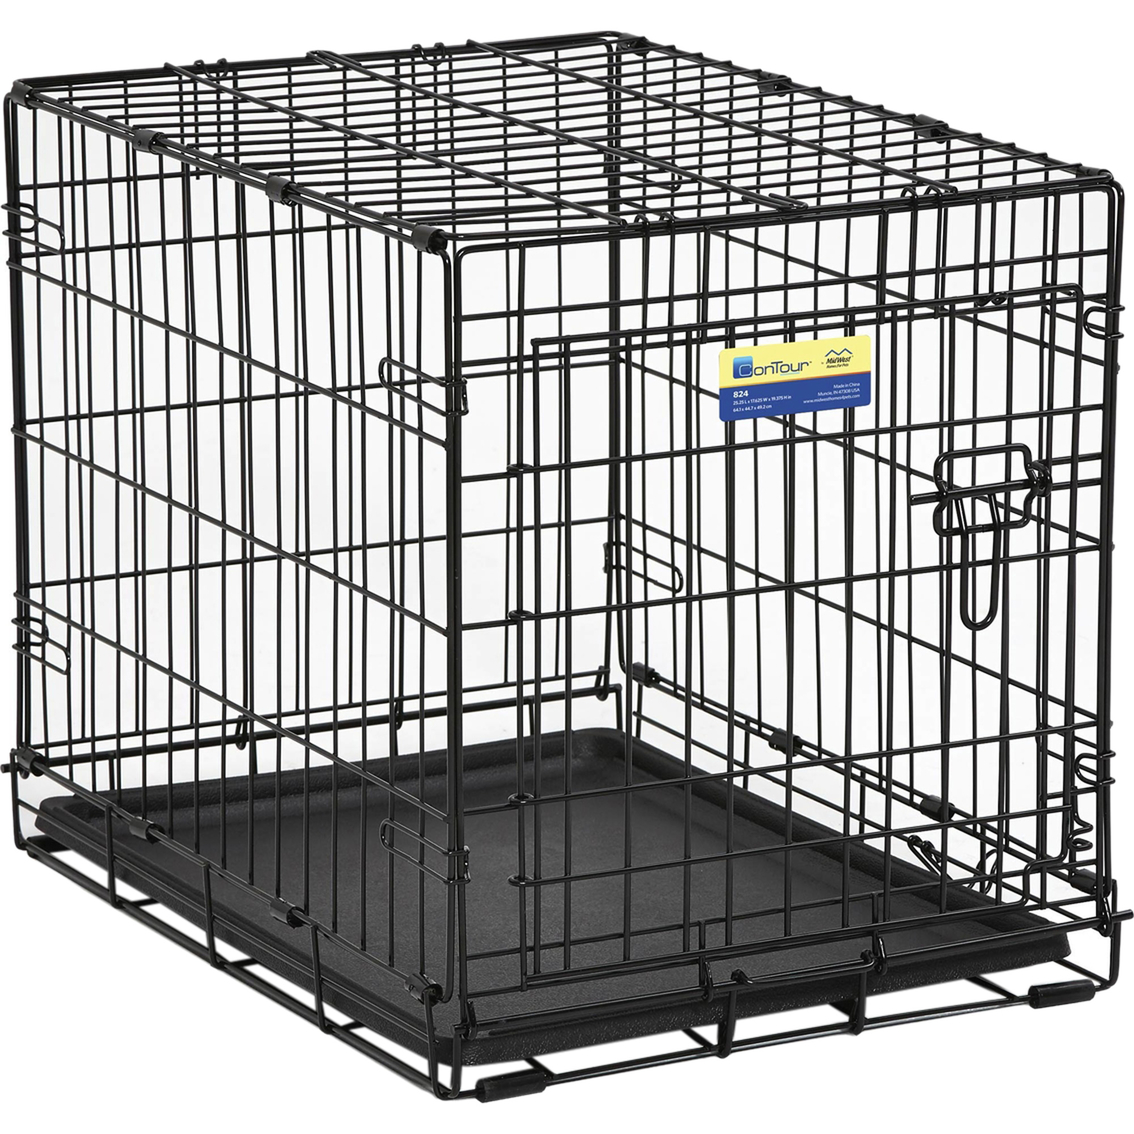 Midwest Contour Double Door Dog Crate - Image 2 of 2